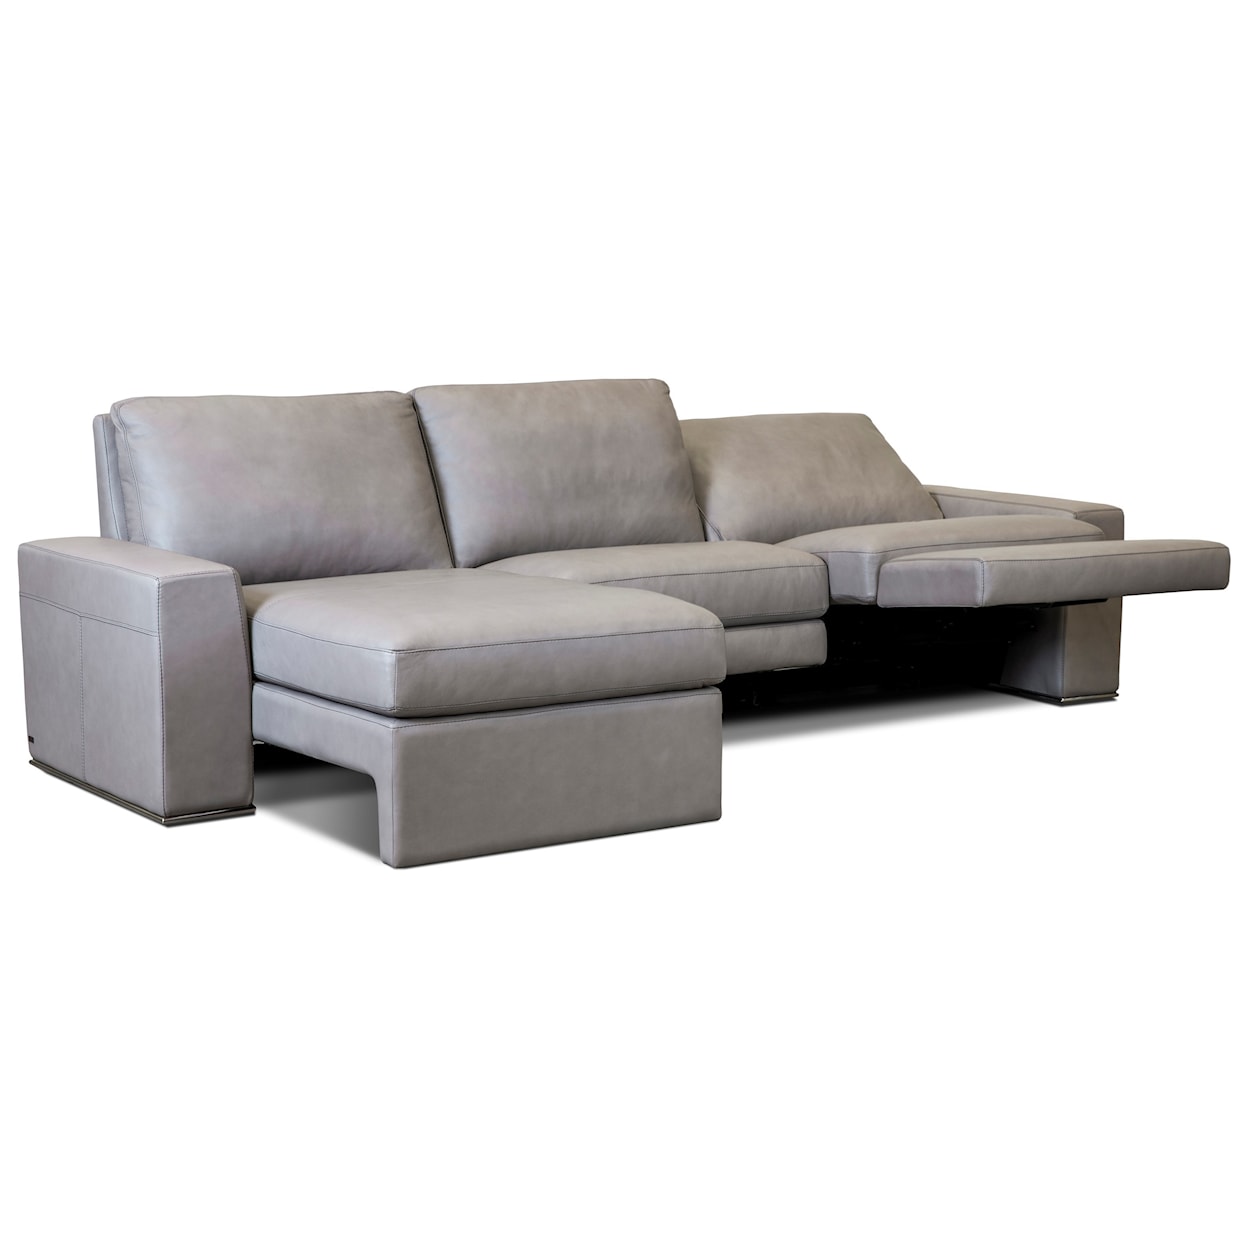 American Leather Paxton Reclining Sectional Sofa w/ LAF Chaise